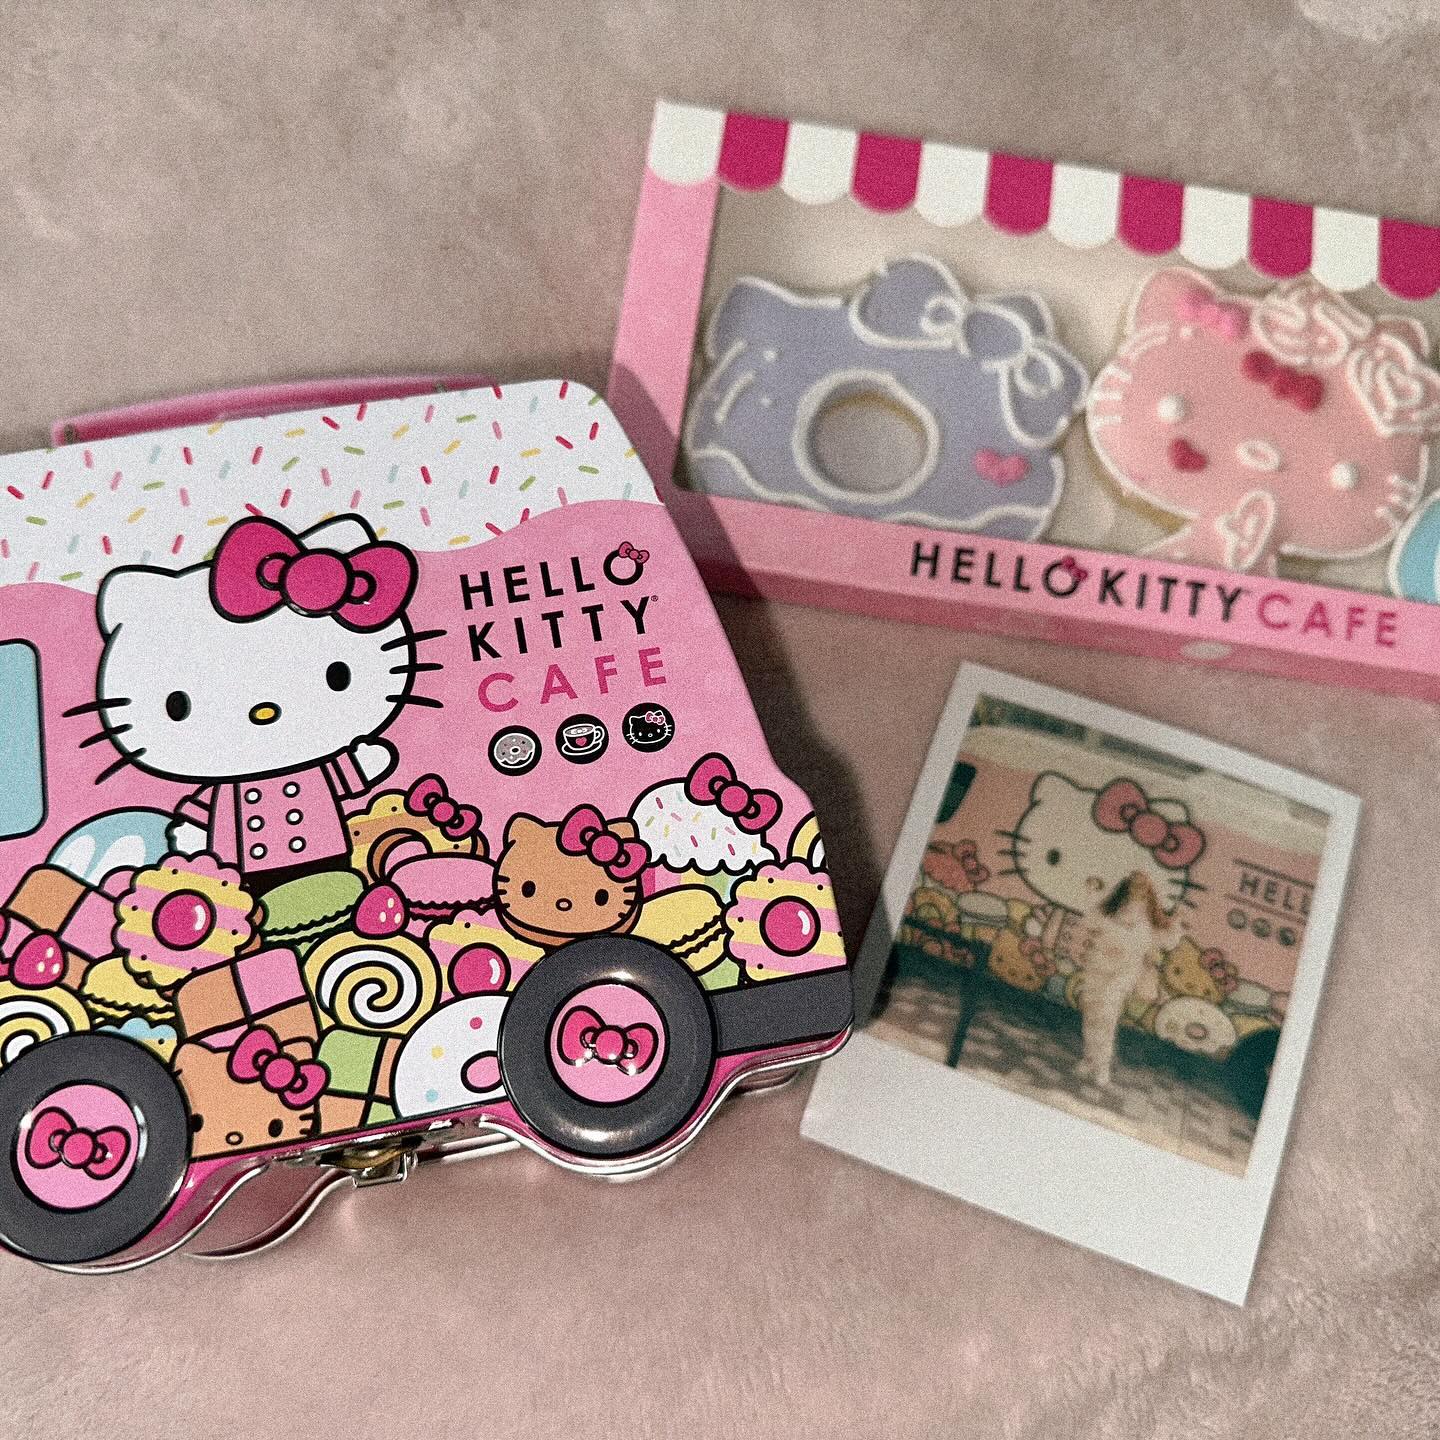 I got to experience the hello kitty truck and it was super kawaii 🎀✨ They had the cutest snacks 🥰

•
•
•

#hellokitty #hellokittytruck #hellokittylover #hellokittylife #kawaii #kawaiigirl #kawaiilove #kawaiilover #kawaiilifestyle #kawaiilife #hellokittyaddict #hellokittycafe #explore #explorepage